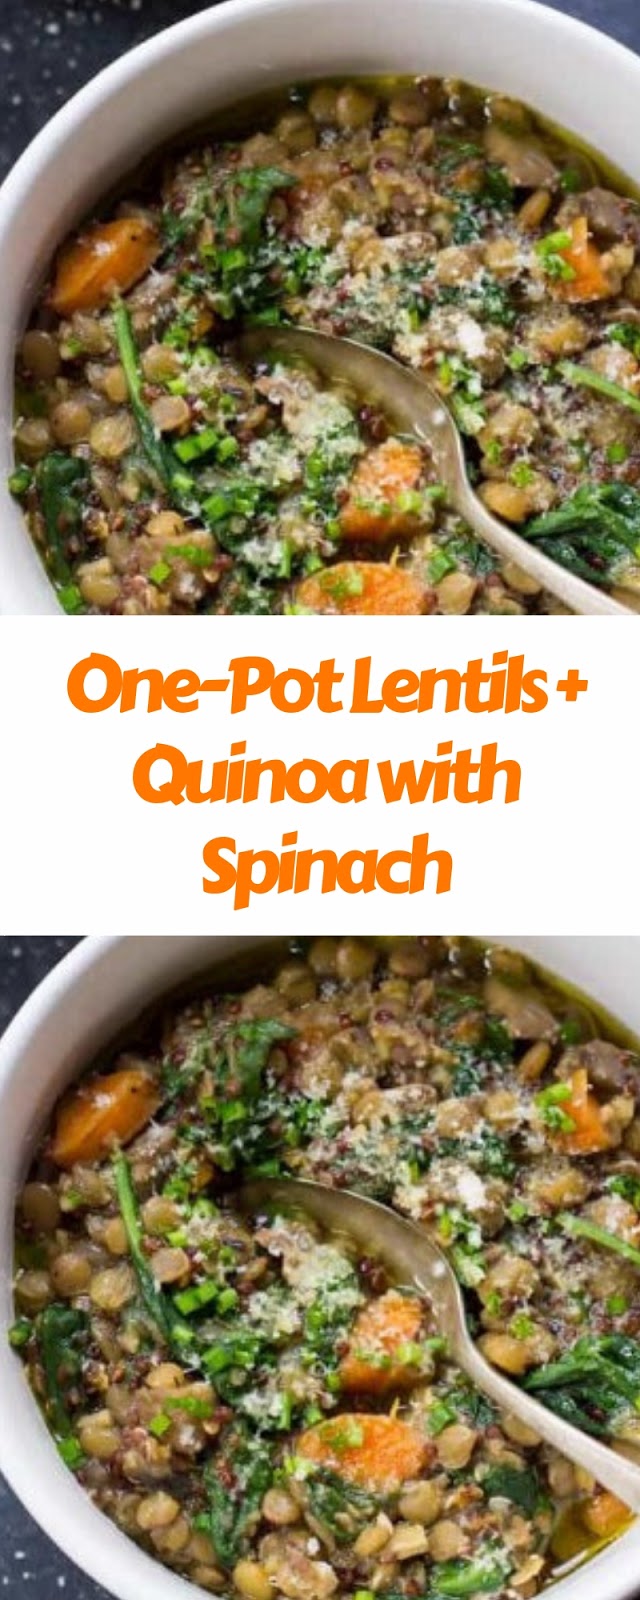 One-Pot Lentils & Quinoa with Spinach